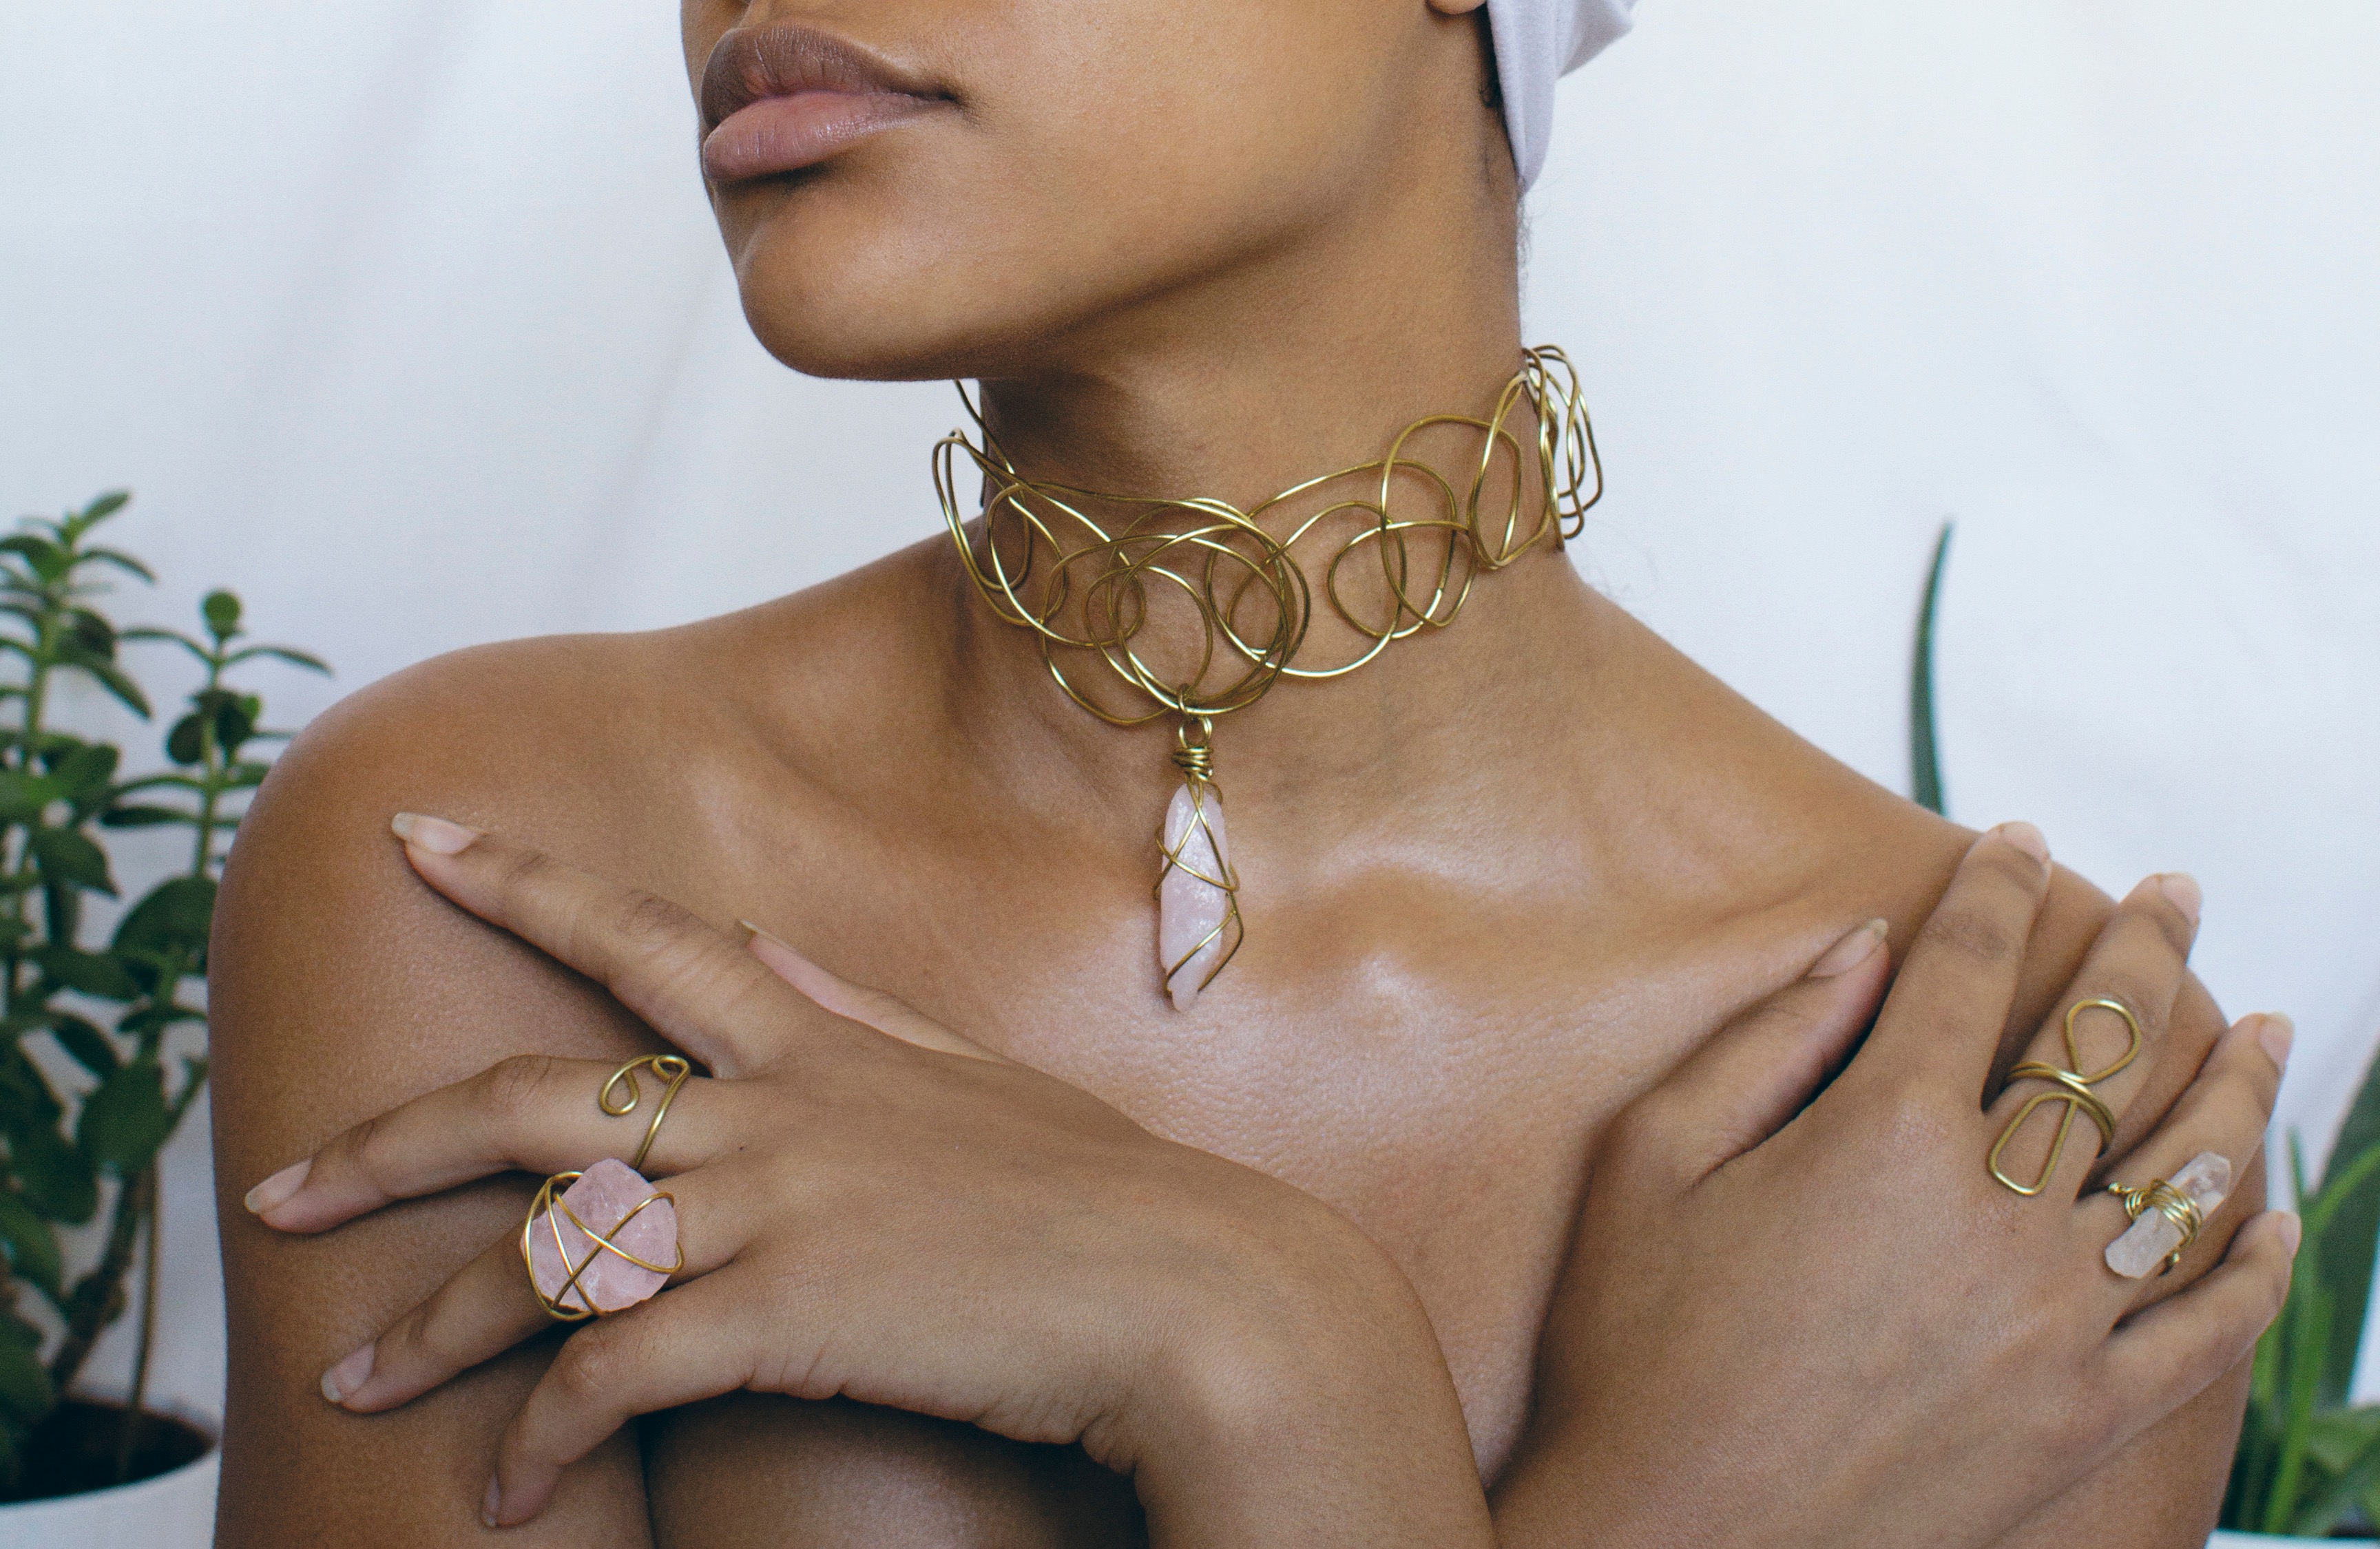 Crystal healing and tarot reading: an interview with jewellery designer Suhaiyla Shakuwra